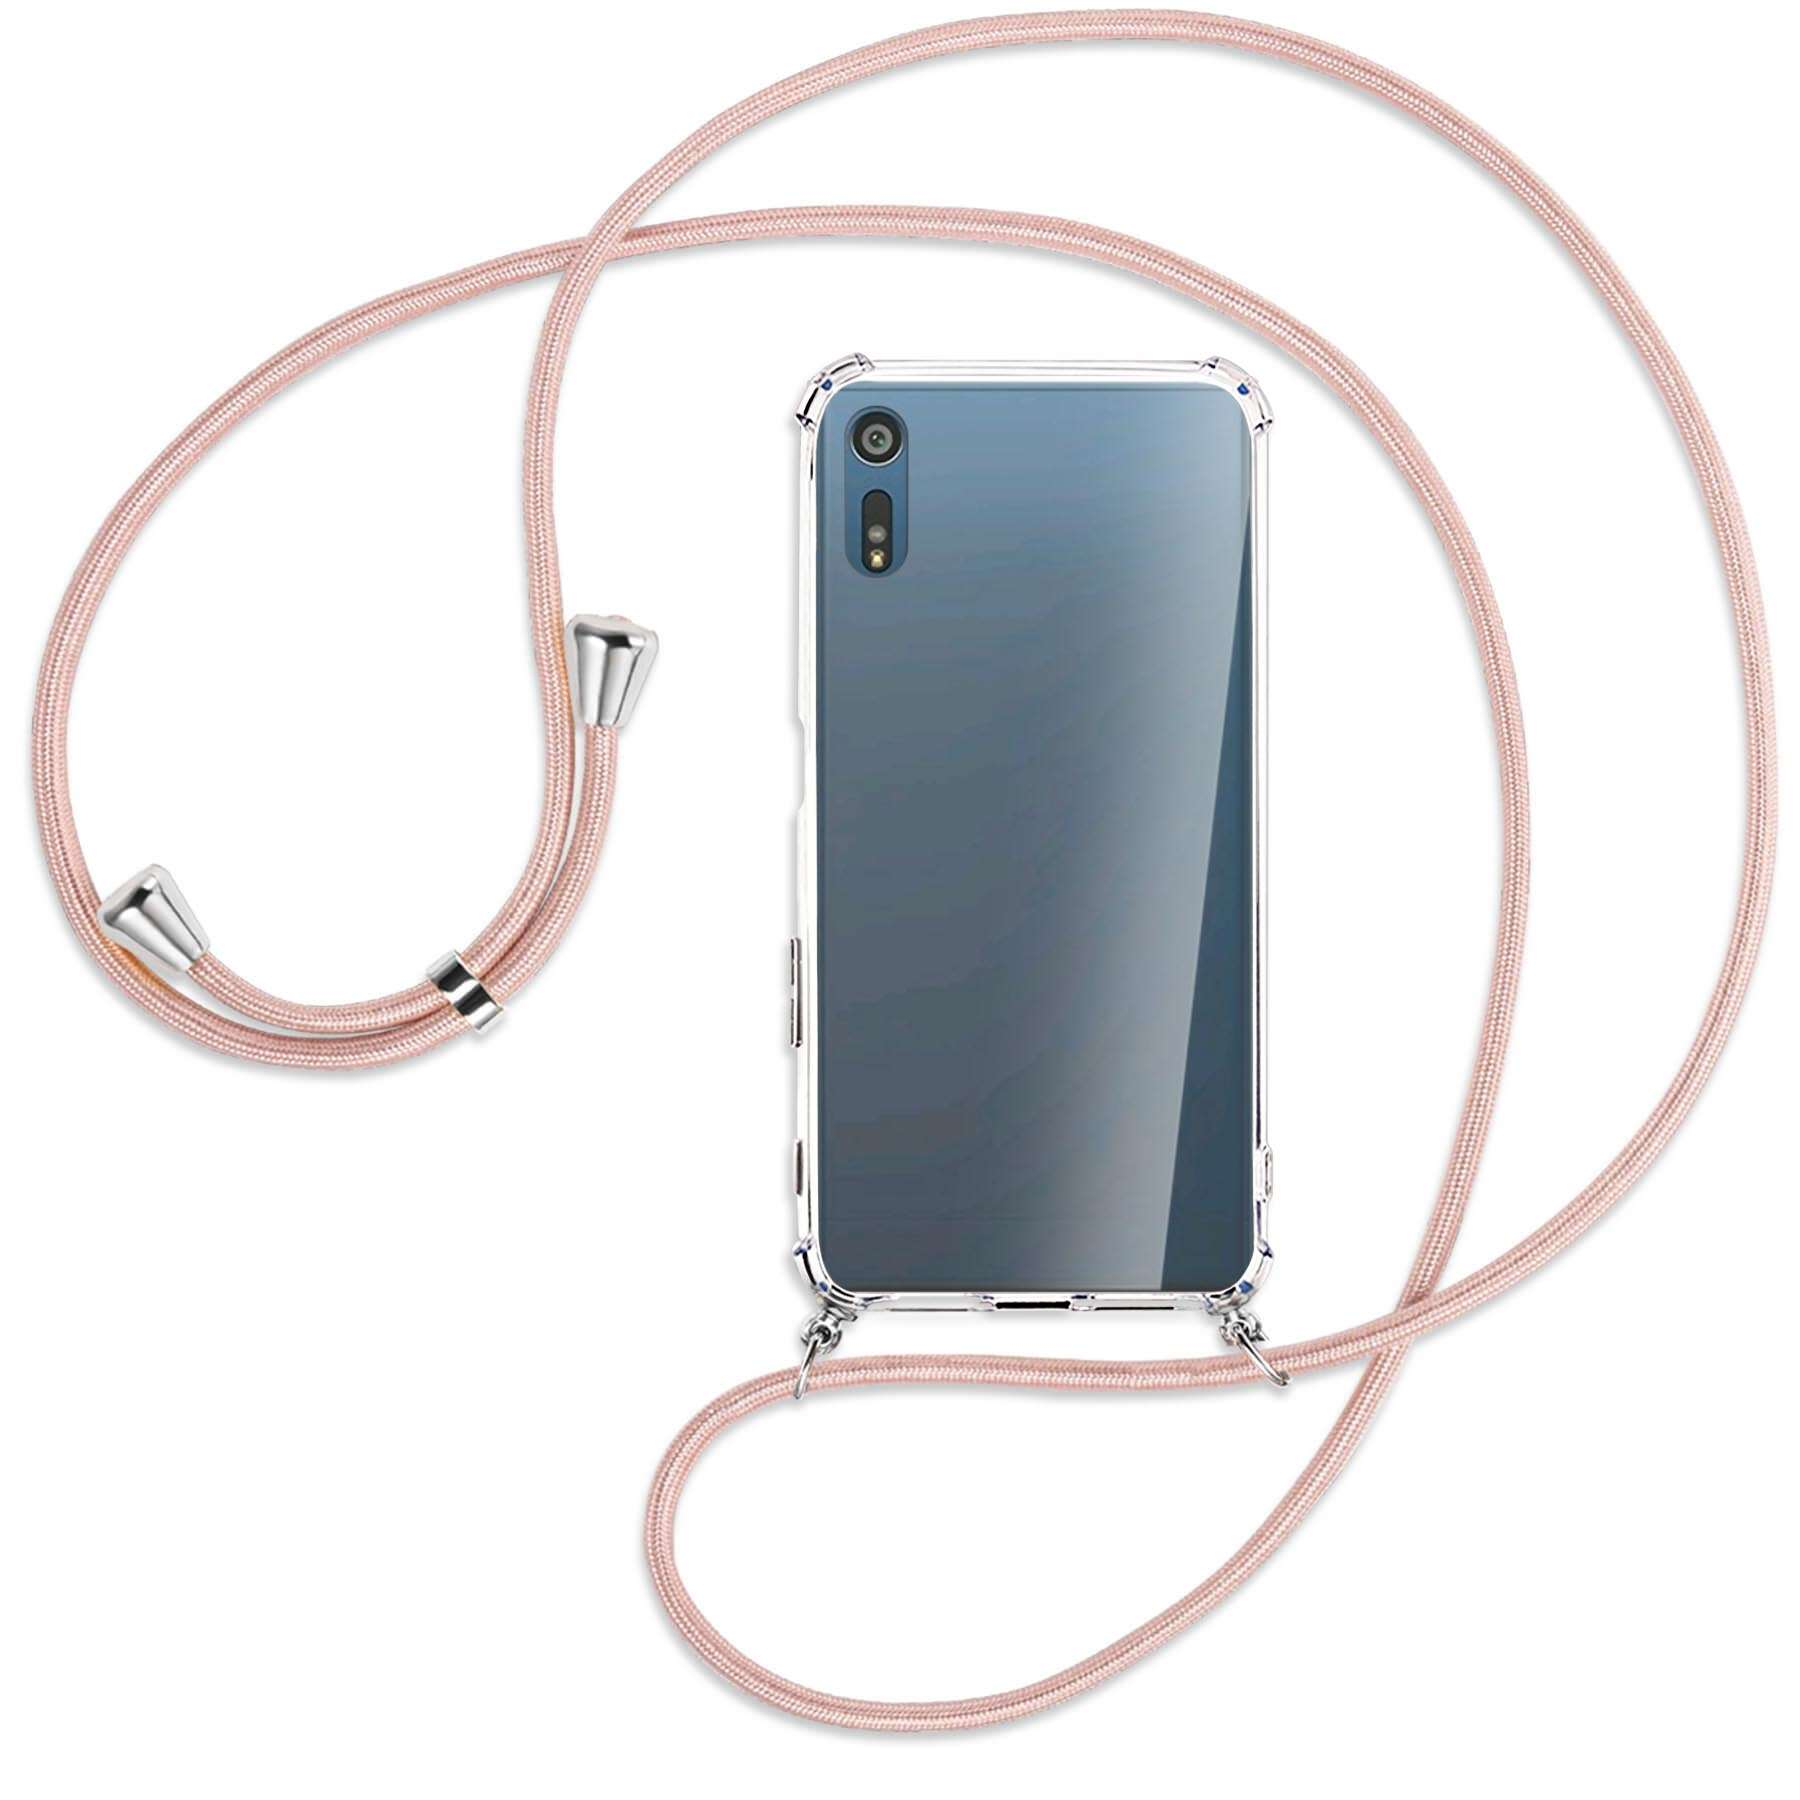 / Kordel, mit Xperia XZ, Umhänge-Hülle Rosegold Backcover, XZs, ENERGY Sony, Silber MTB Xperia MORE